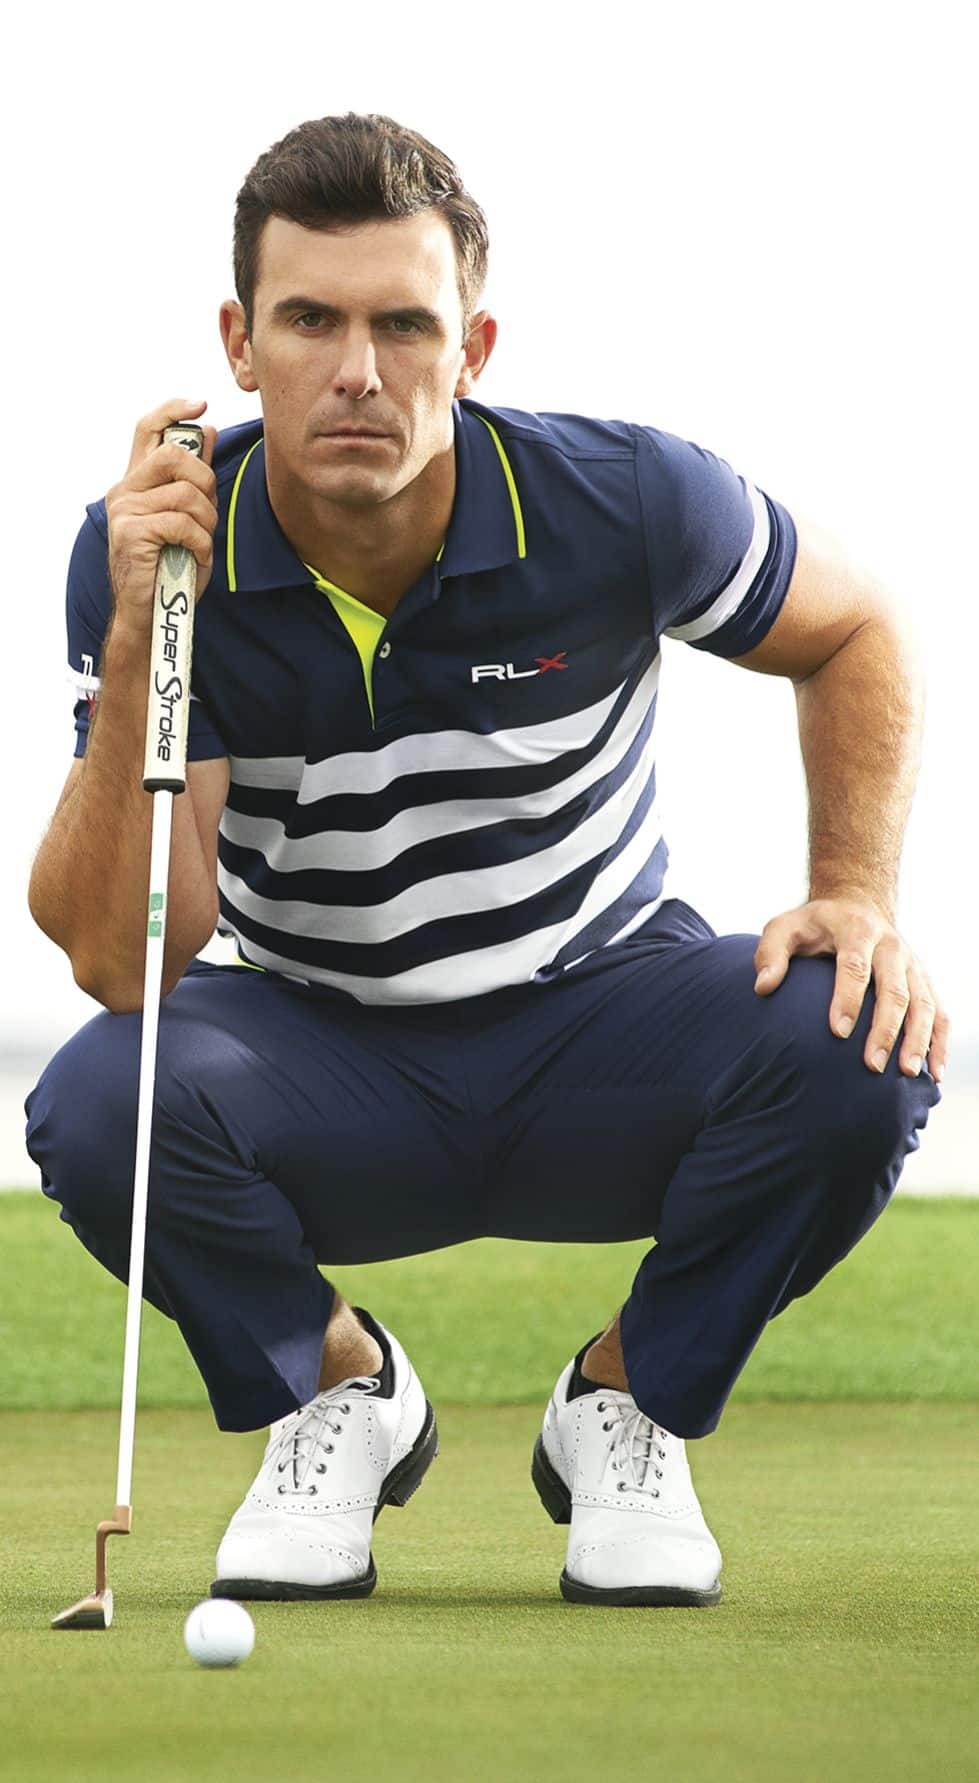 25 Best Golfing Outfits for Men - What to Wear Golfing?